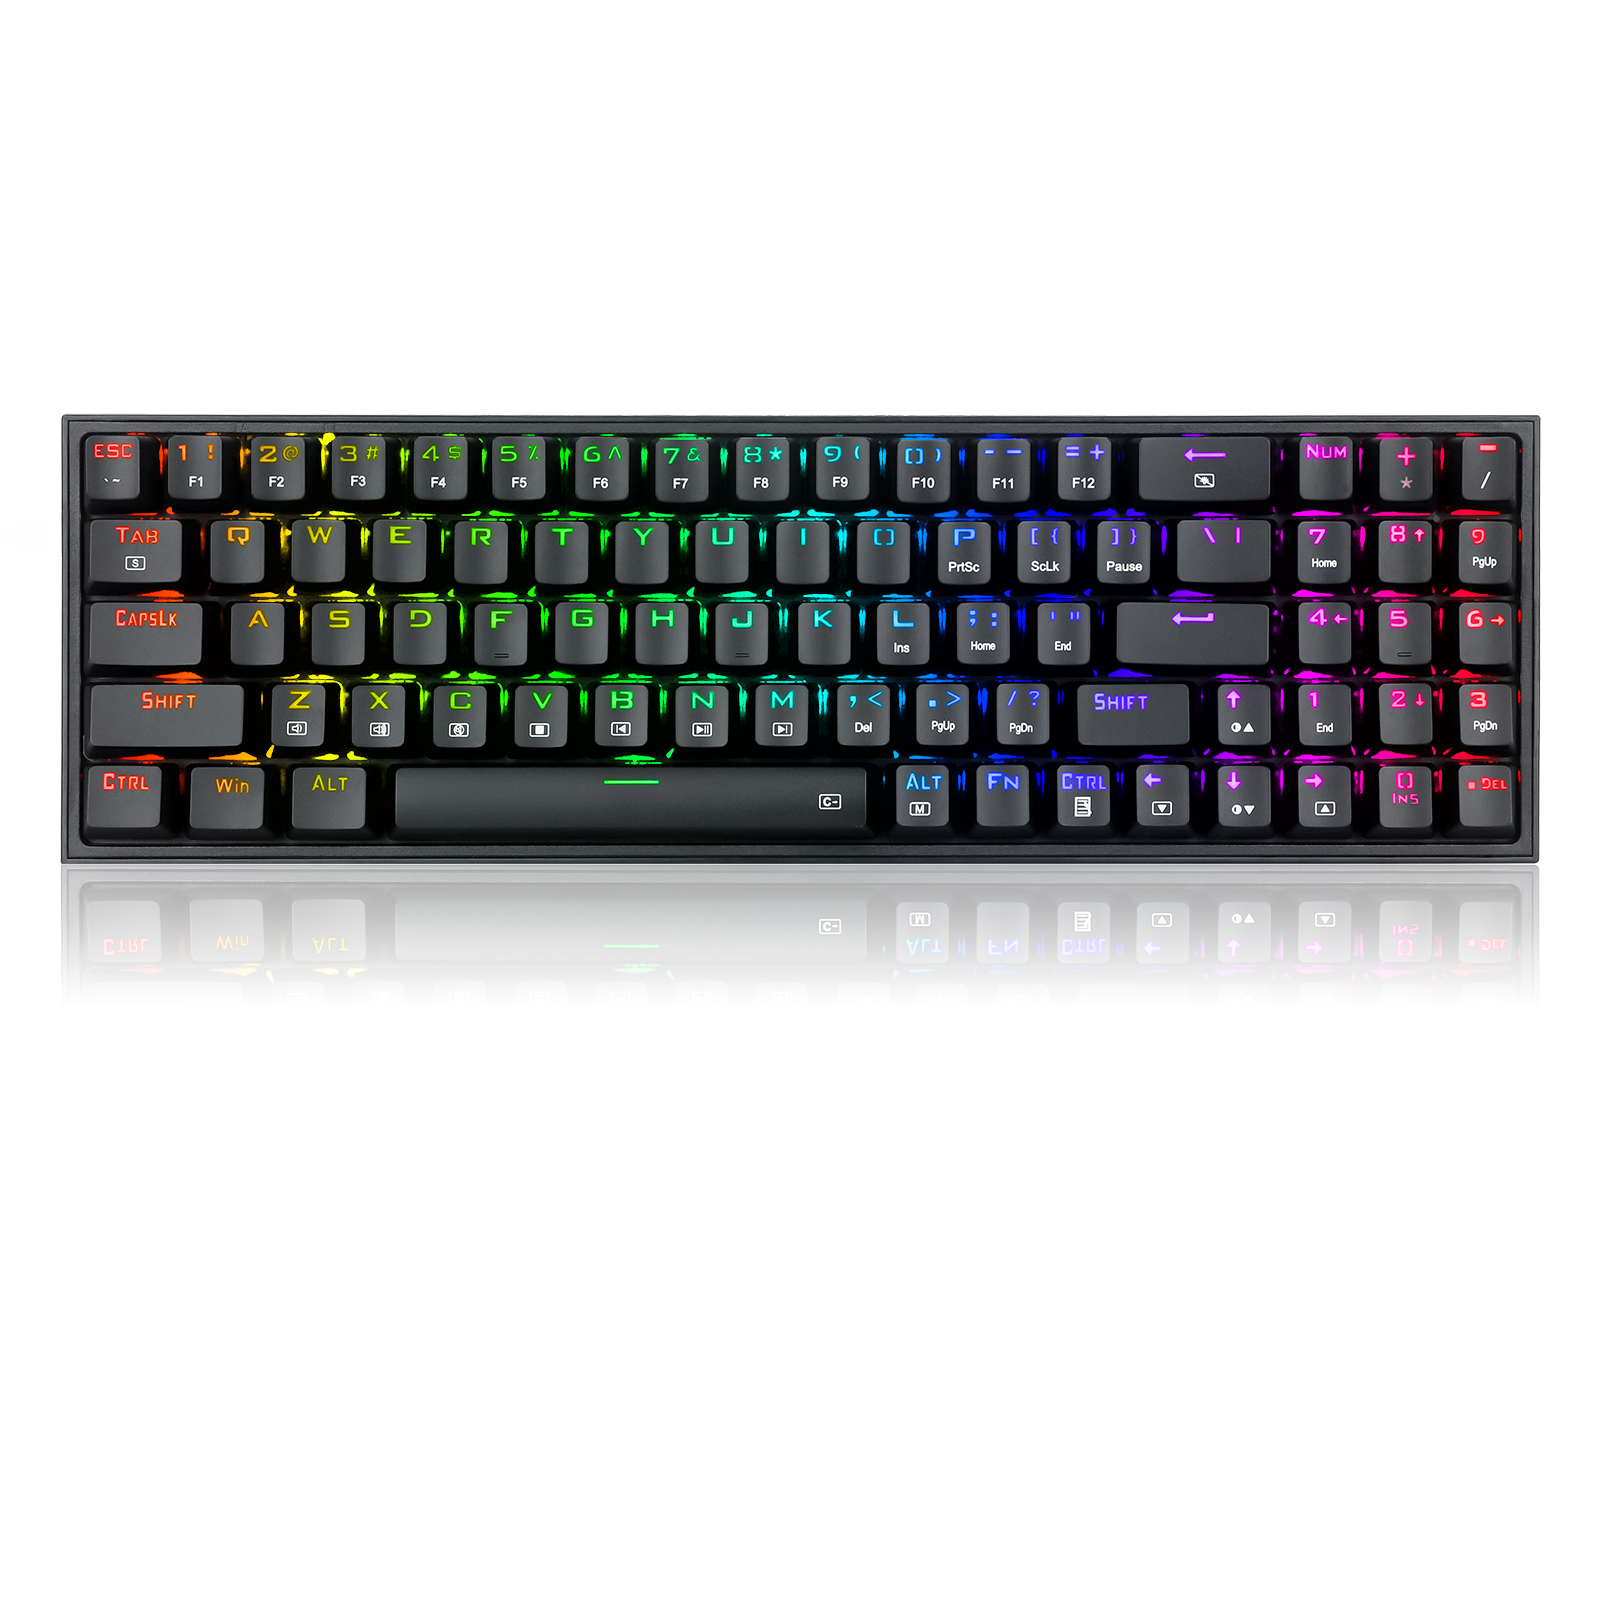 Redragon K628 Pollux 75% Wired RGB Gaming Keyboard, 78 Keys Hot-Swappable Compact Mechanical Keyboard w/100% Hot-Swap Socket, Red Switch